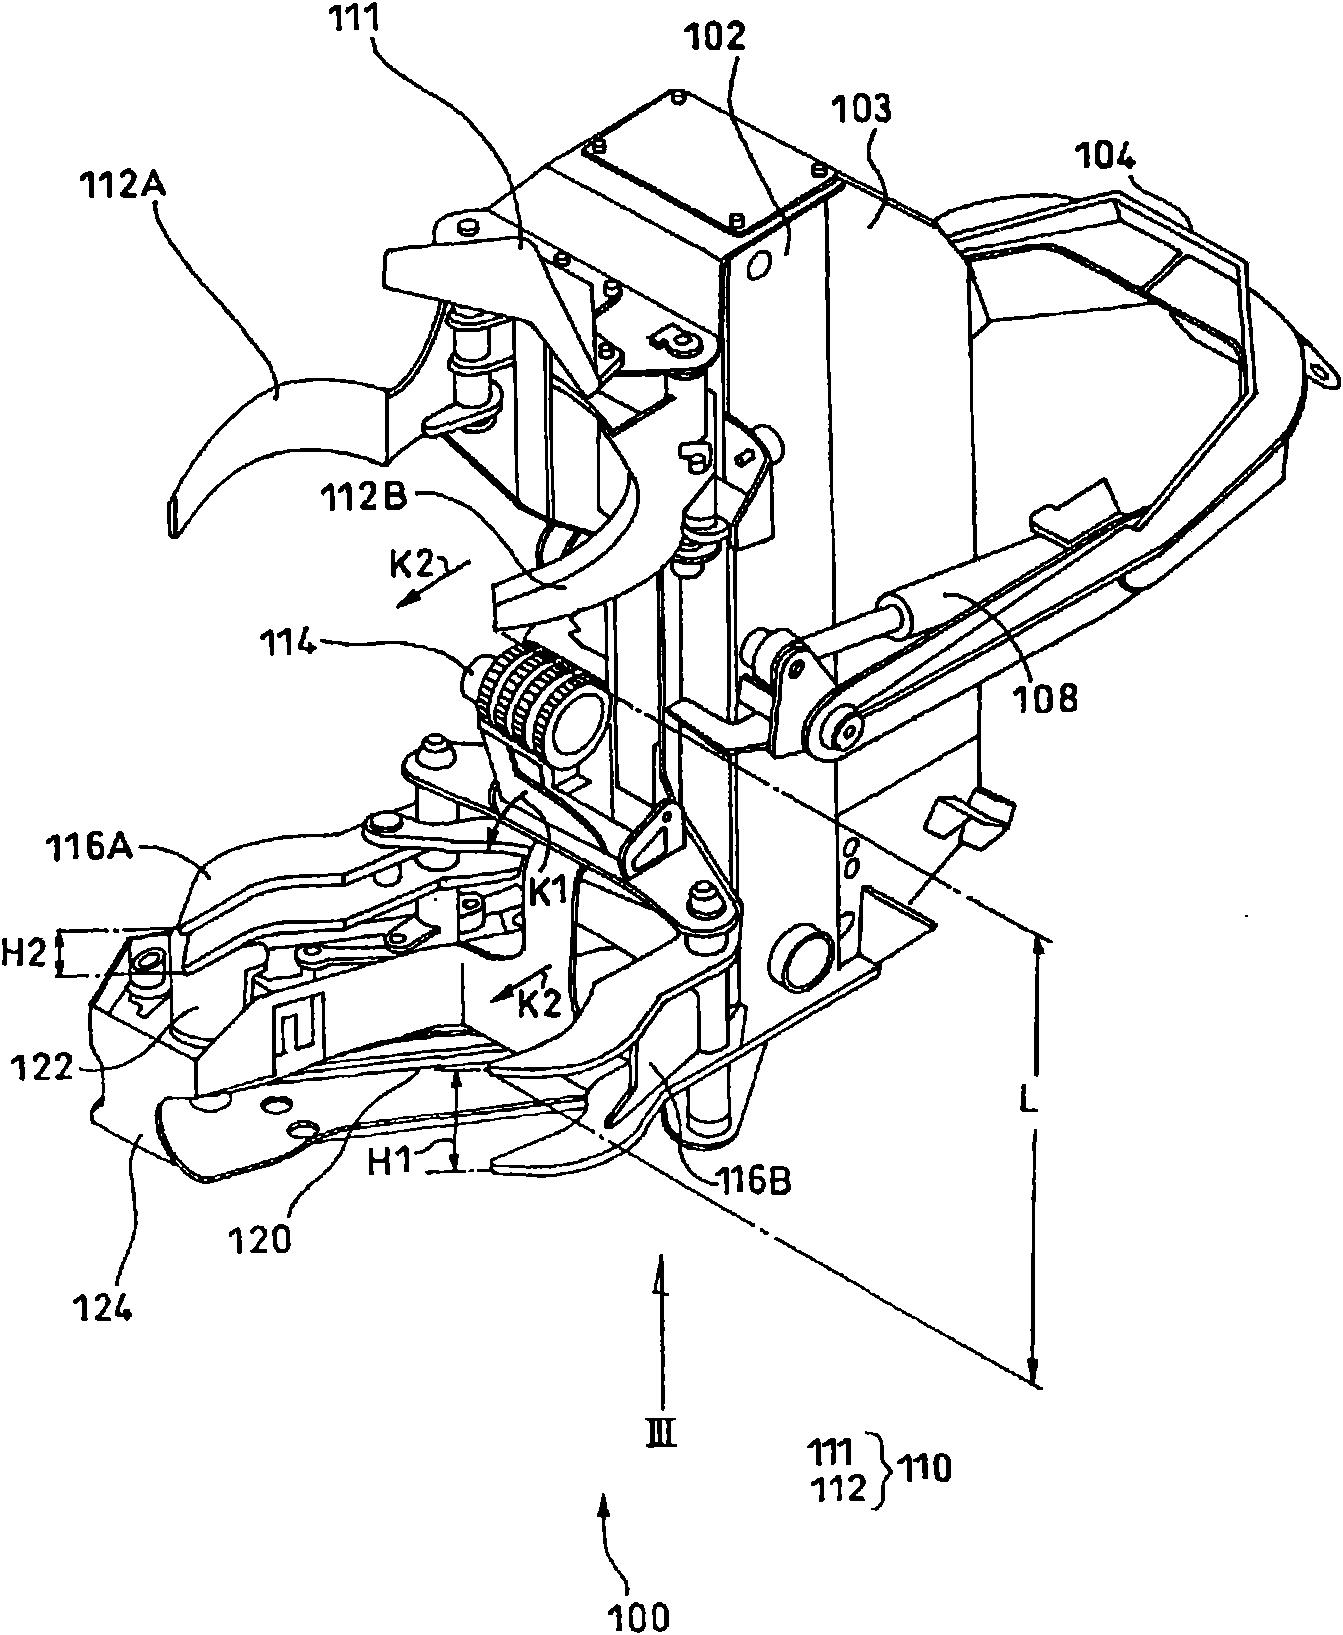 Harvester machine for wood and felling/wood making method